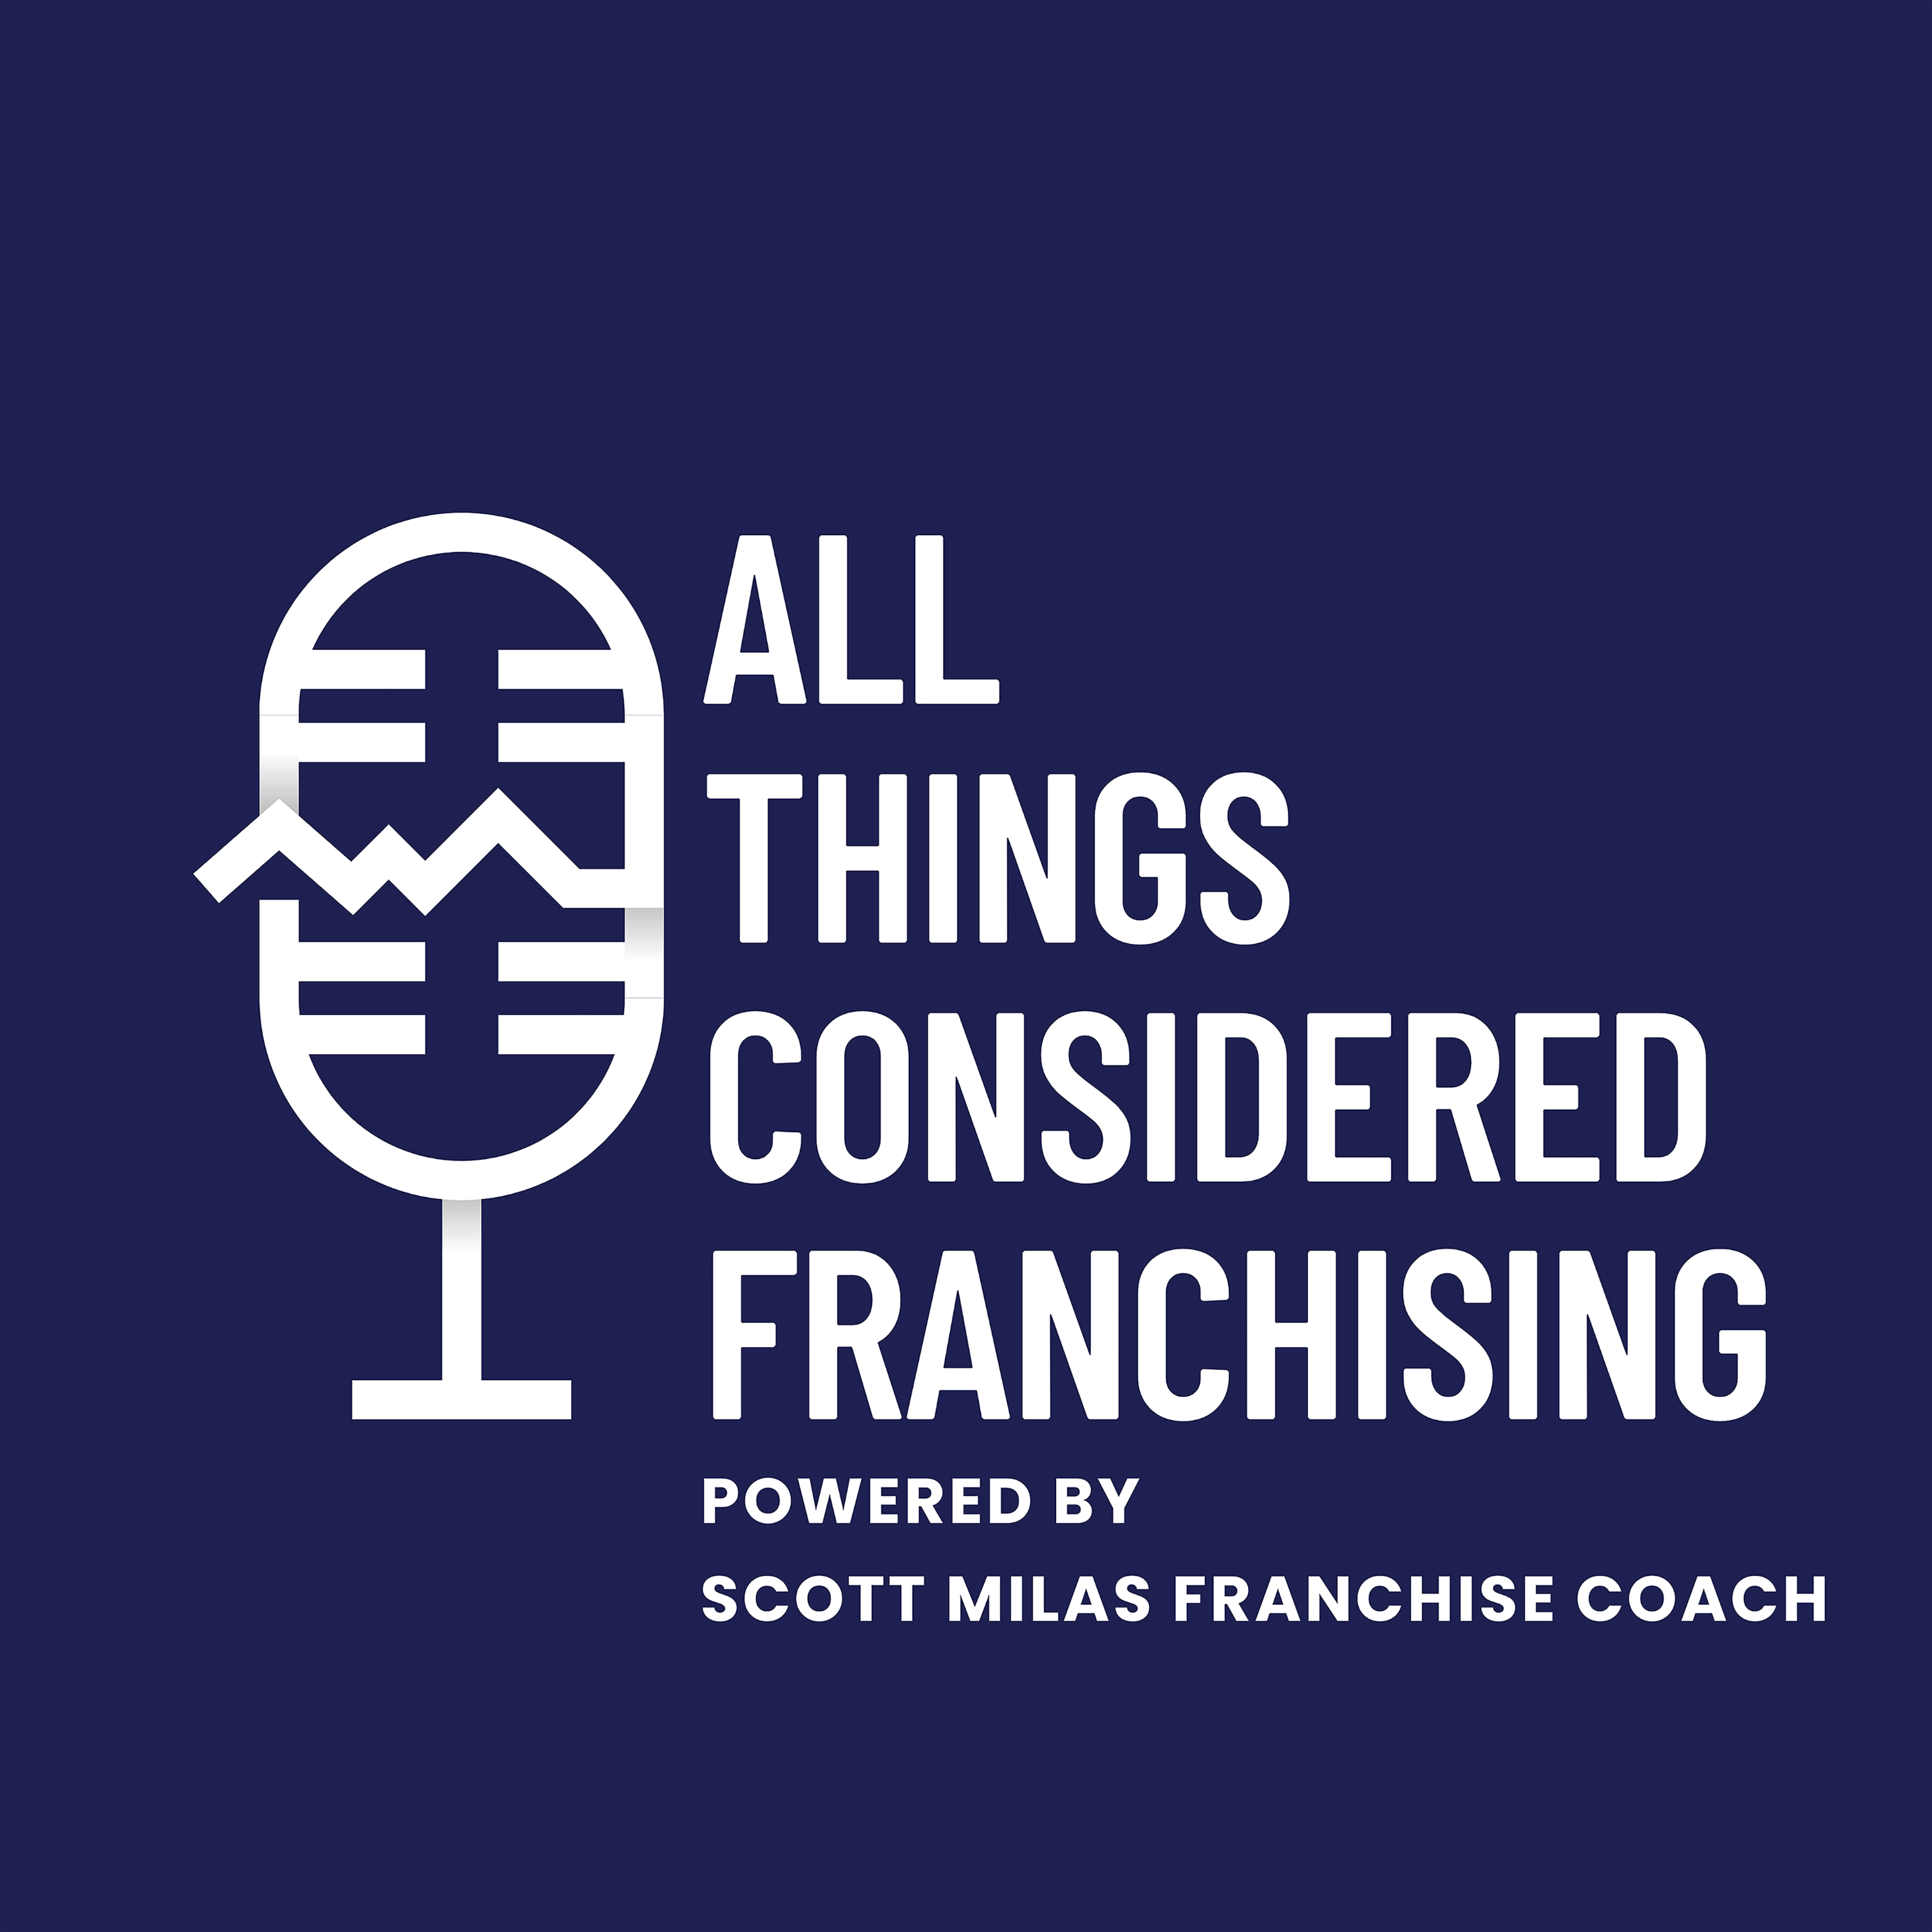 Scotty Milas' All Things Considered Franchising Podcast w/ Jeff Johnson - Founder & CEO of Franchise Research Institute